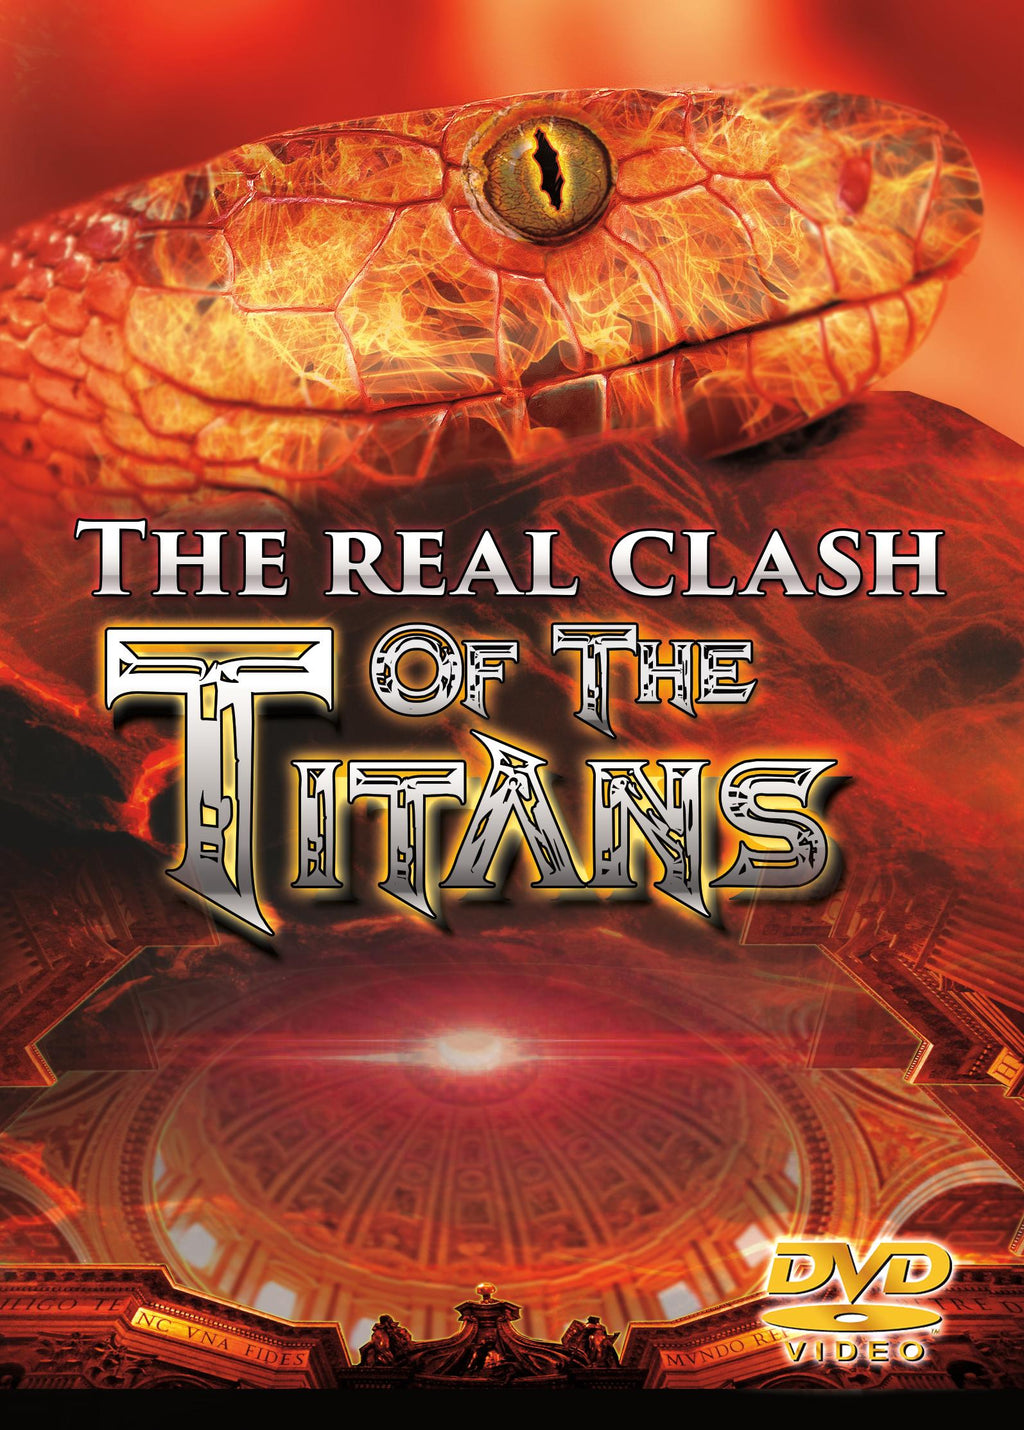 The Real Clash of the Titans